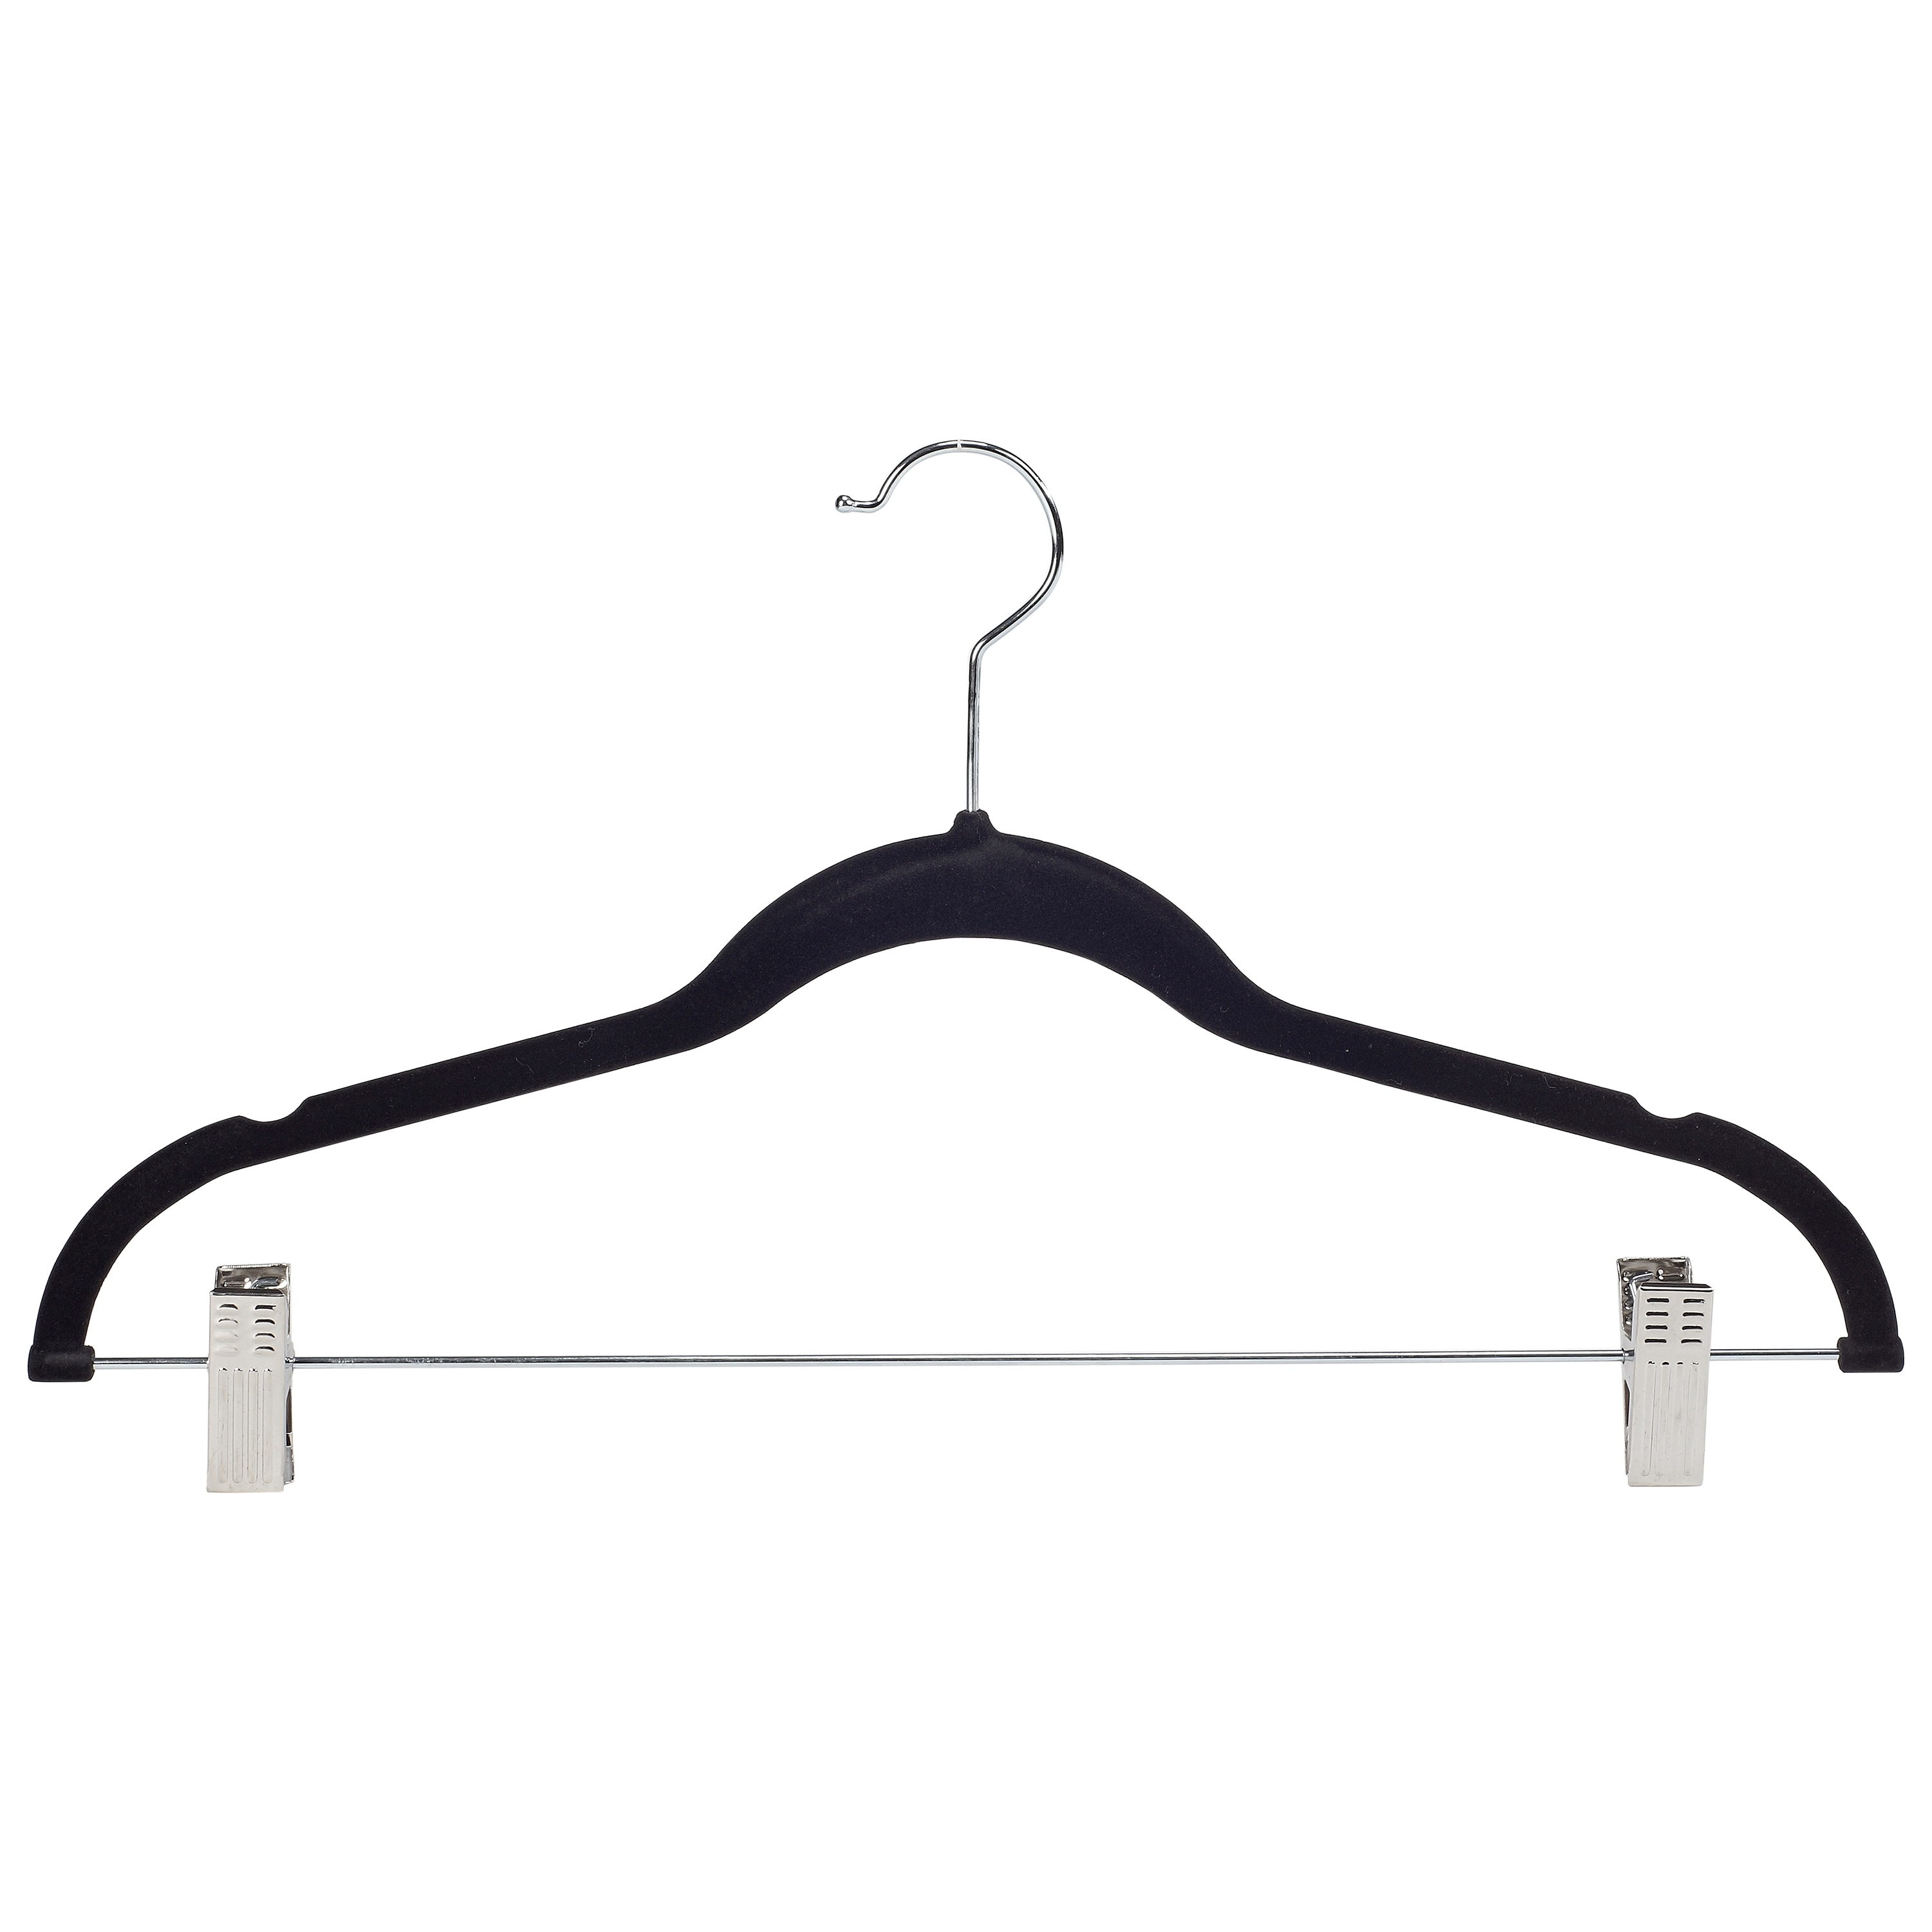 https://ak1.ostkcdn.com/images/products/is/images/direct/13c02ea24116179b3534078e1bc4510d2206c9c0/Simplify-6-Pack-Velvet-Hangers-with-Clips-in-Black.jpg